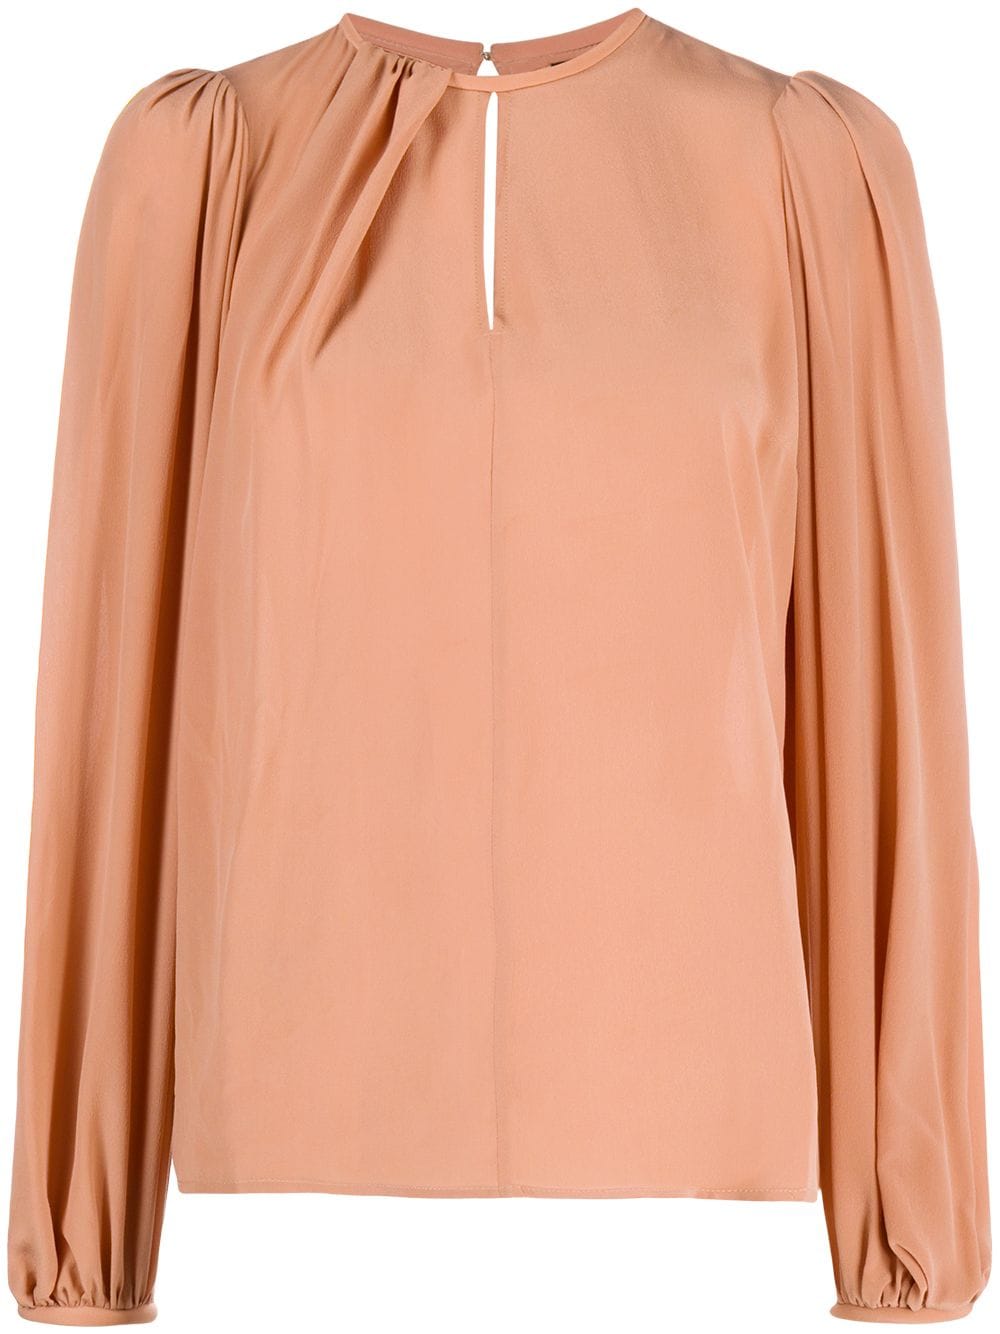 RUCHED DETAIL BLOUSE